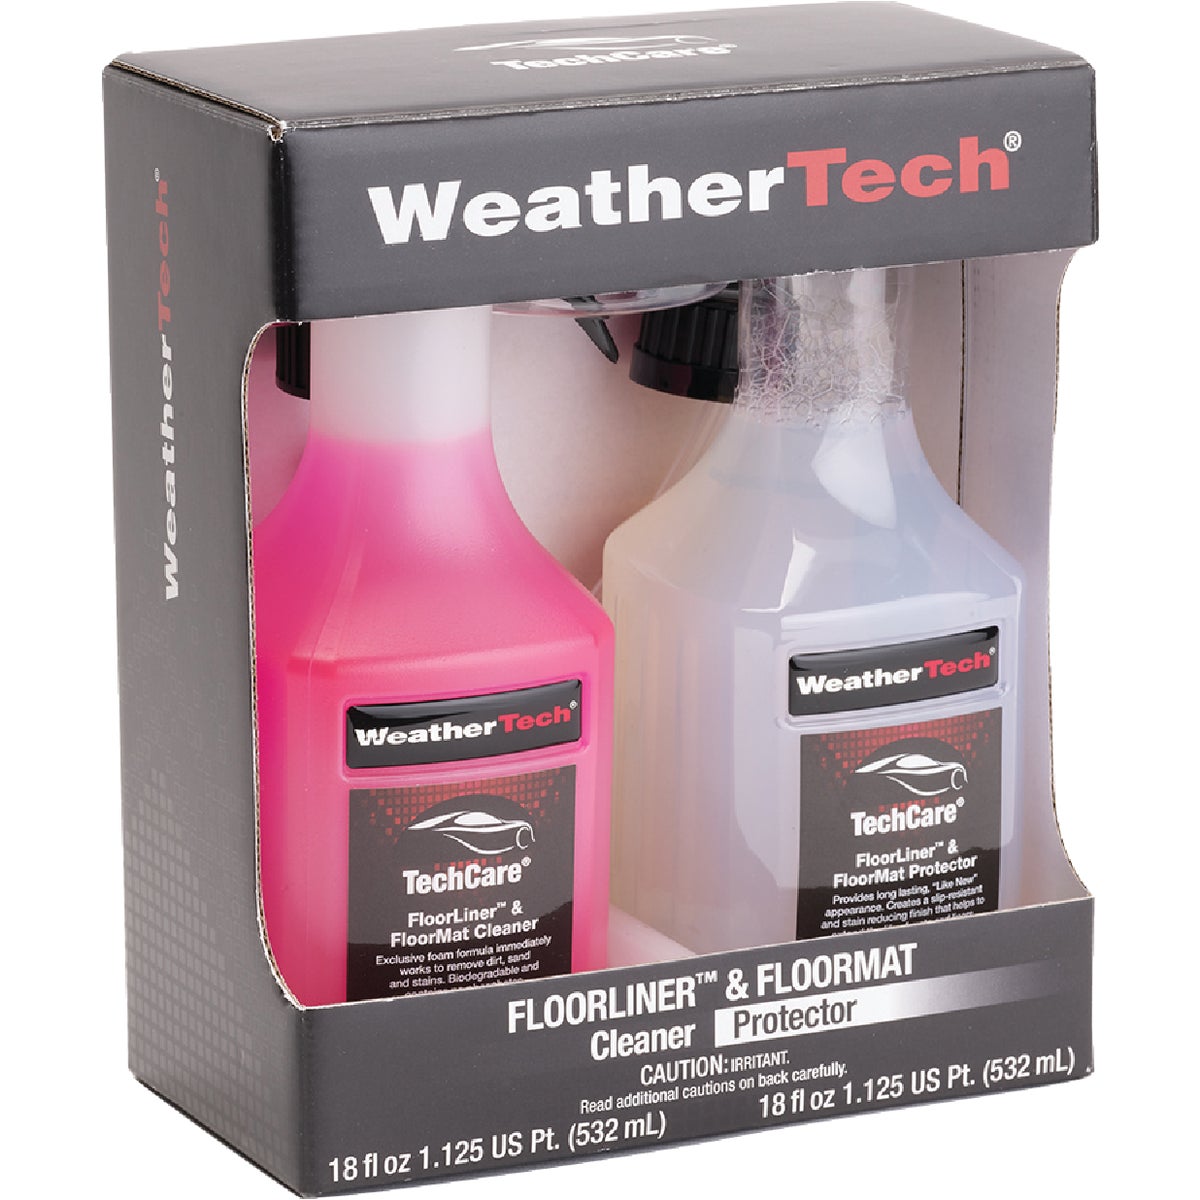 Item 570645, The WeatherTech TechCare Cleaner and Protector Kit is custom engineered 